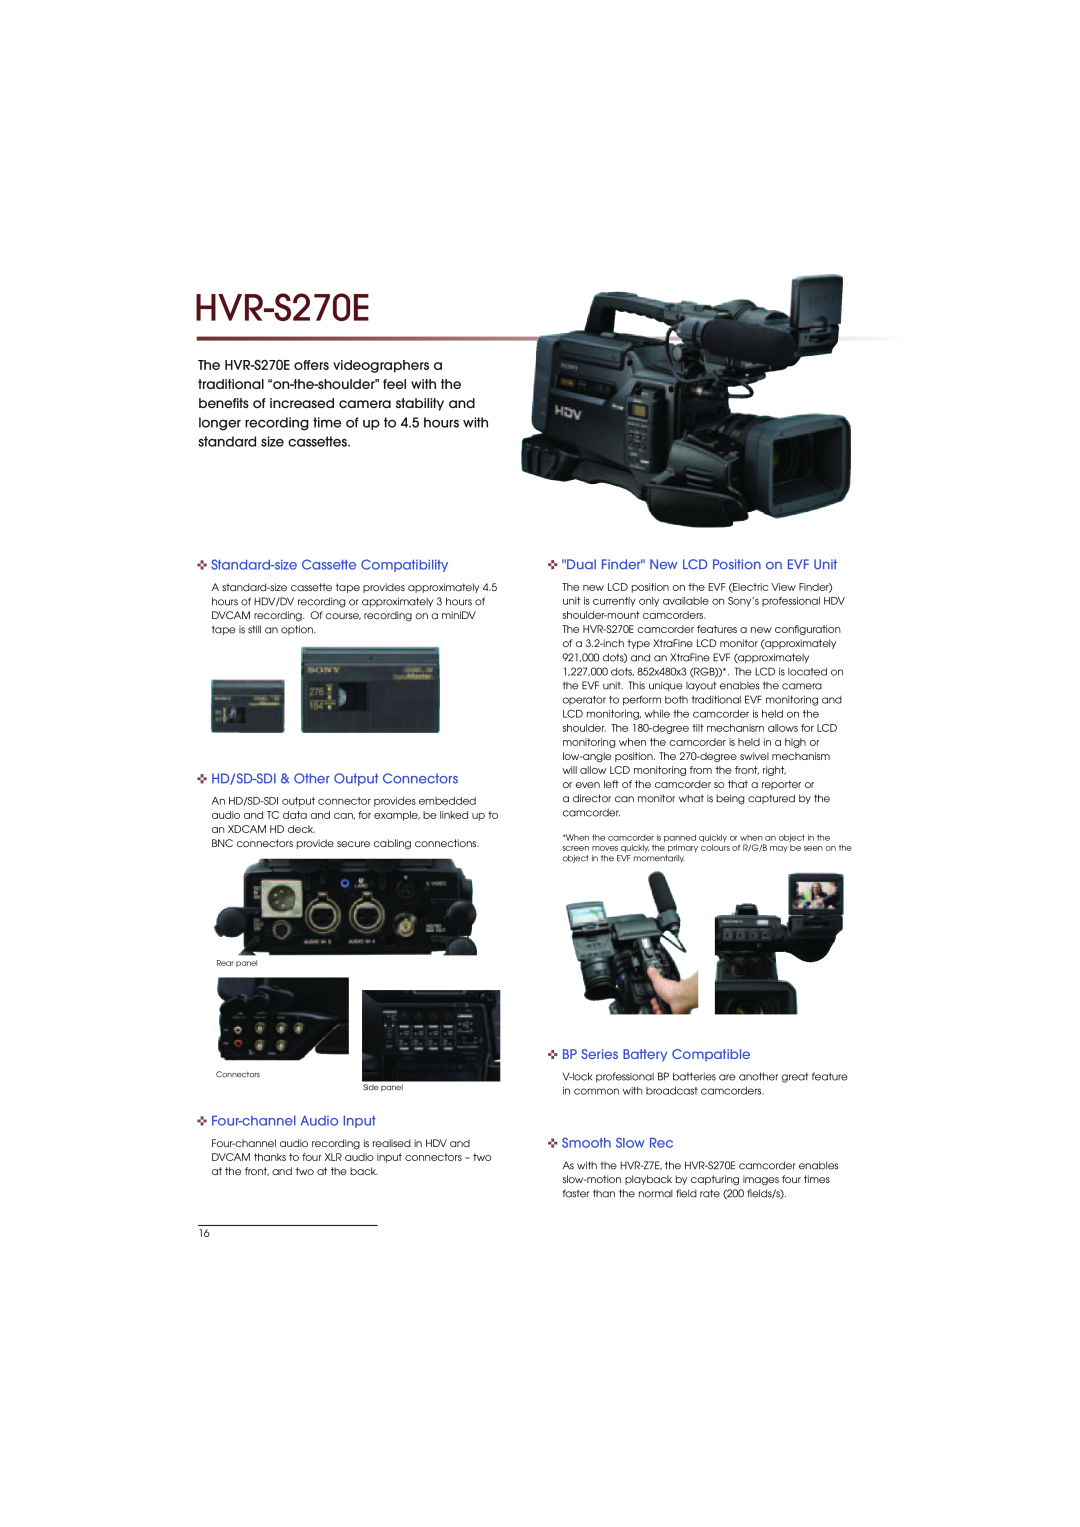 Sony HVR-S270E manual Standard-size Cassette Compatibility, HD/SD-SDI & Other Output Connectors, Four-channel Audio Input 